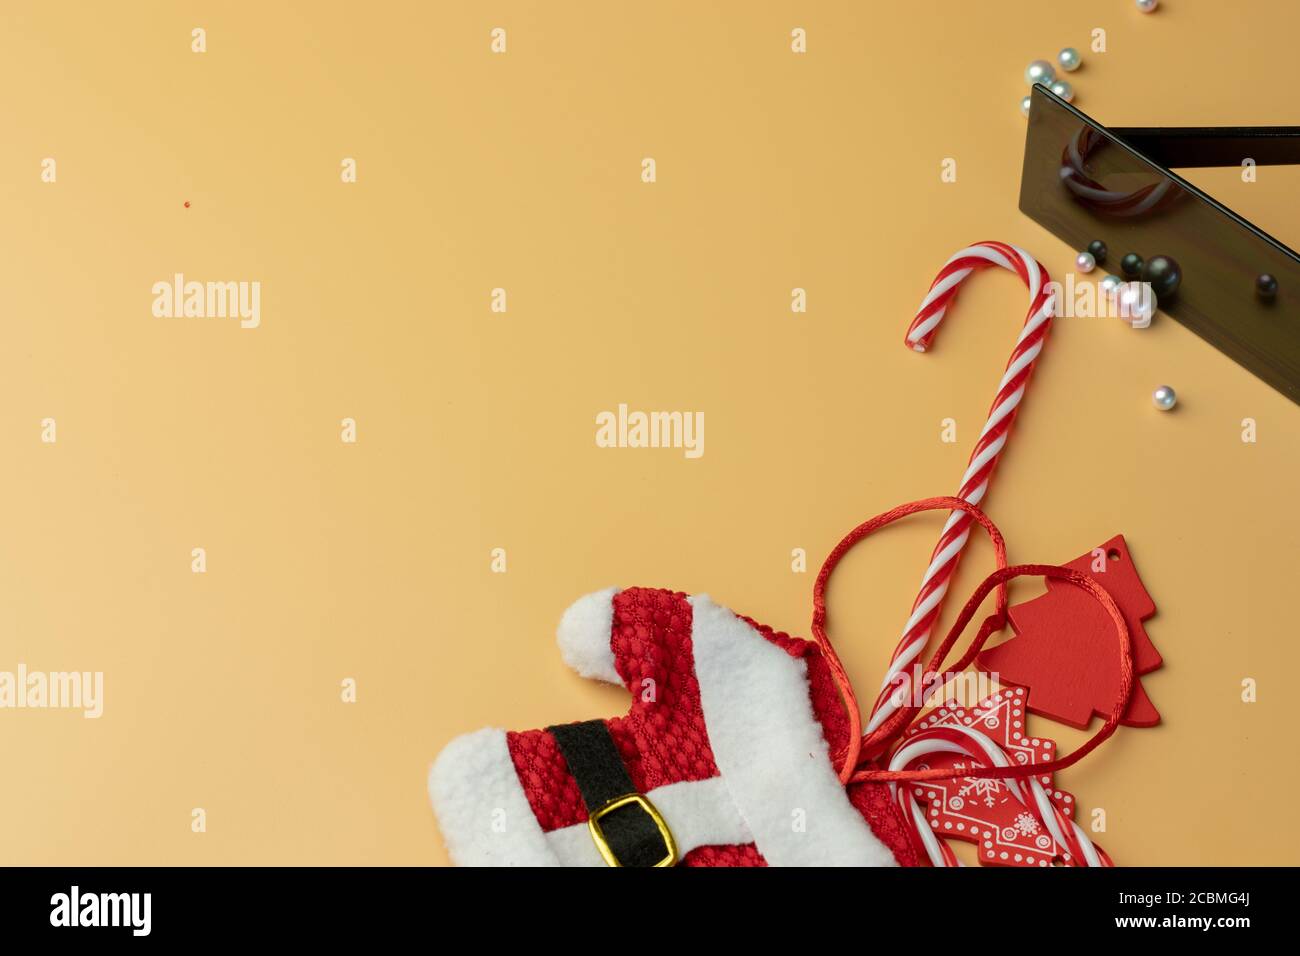 Christmas design flat lay on orange background top view, New Year theme objects with copy space Stock Photo